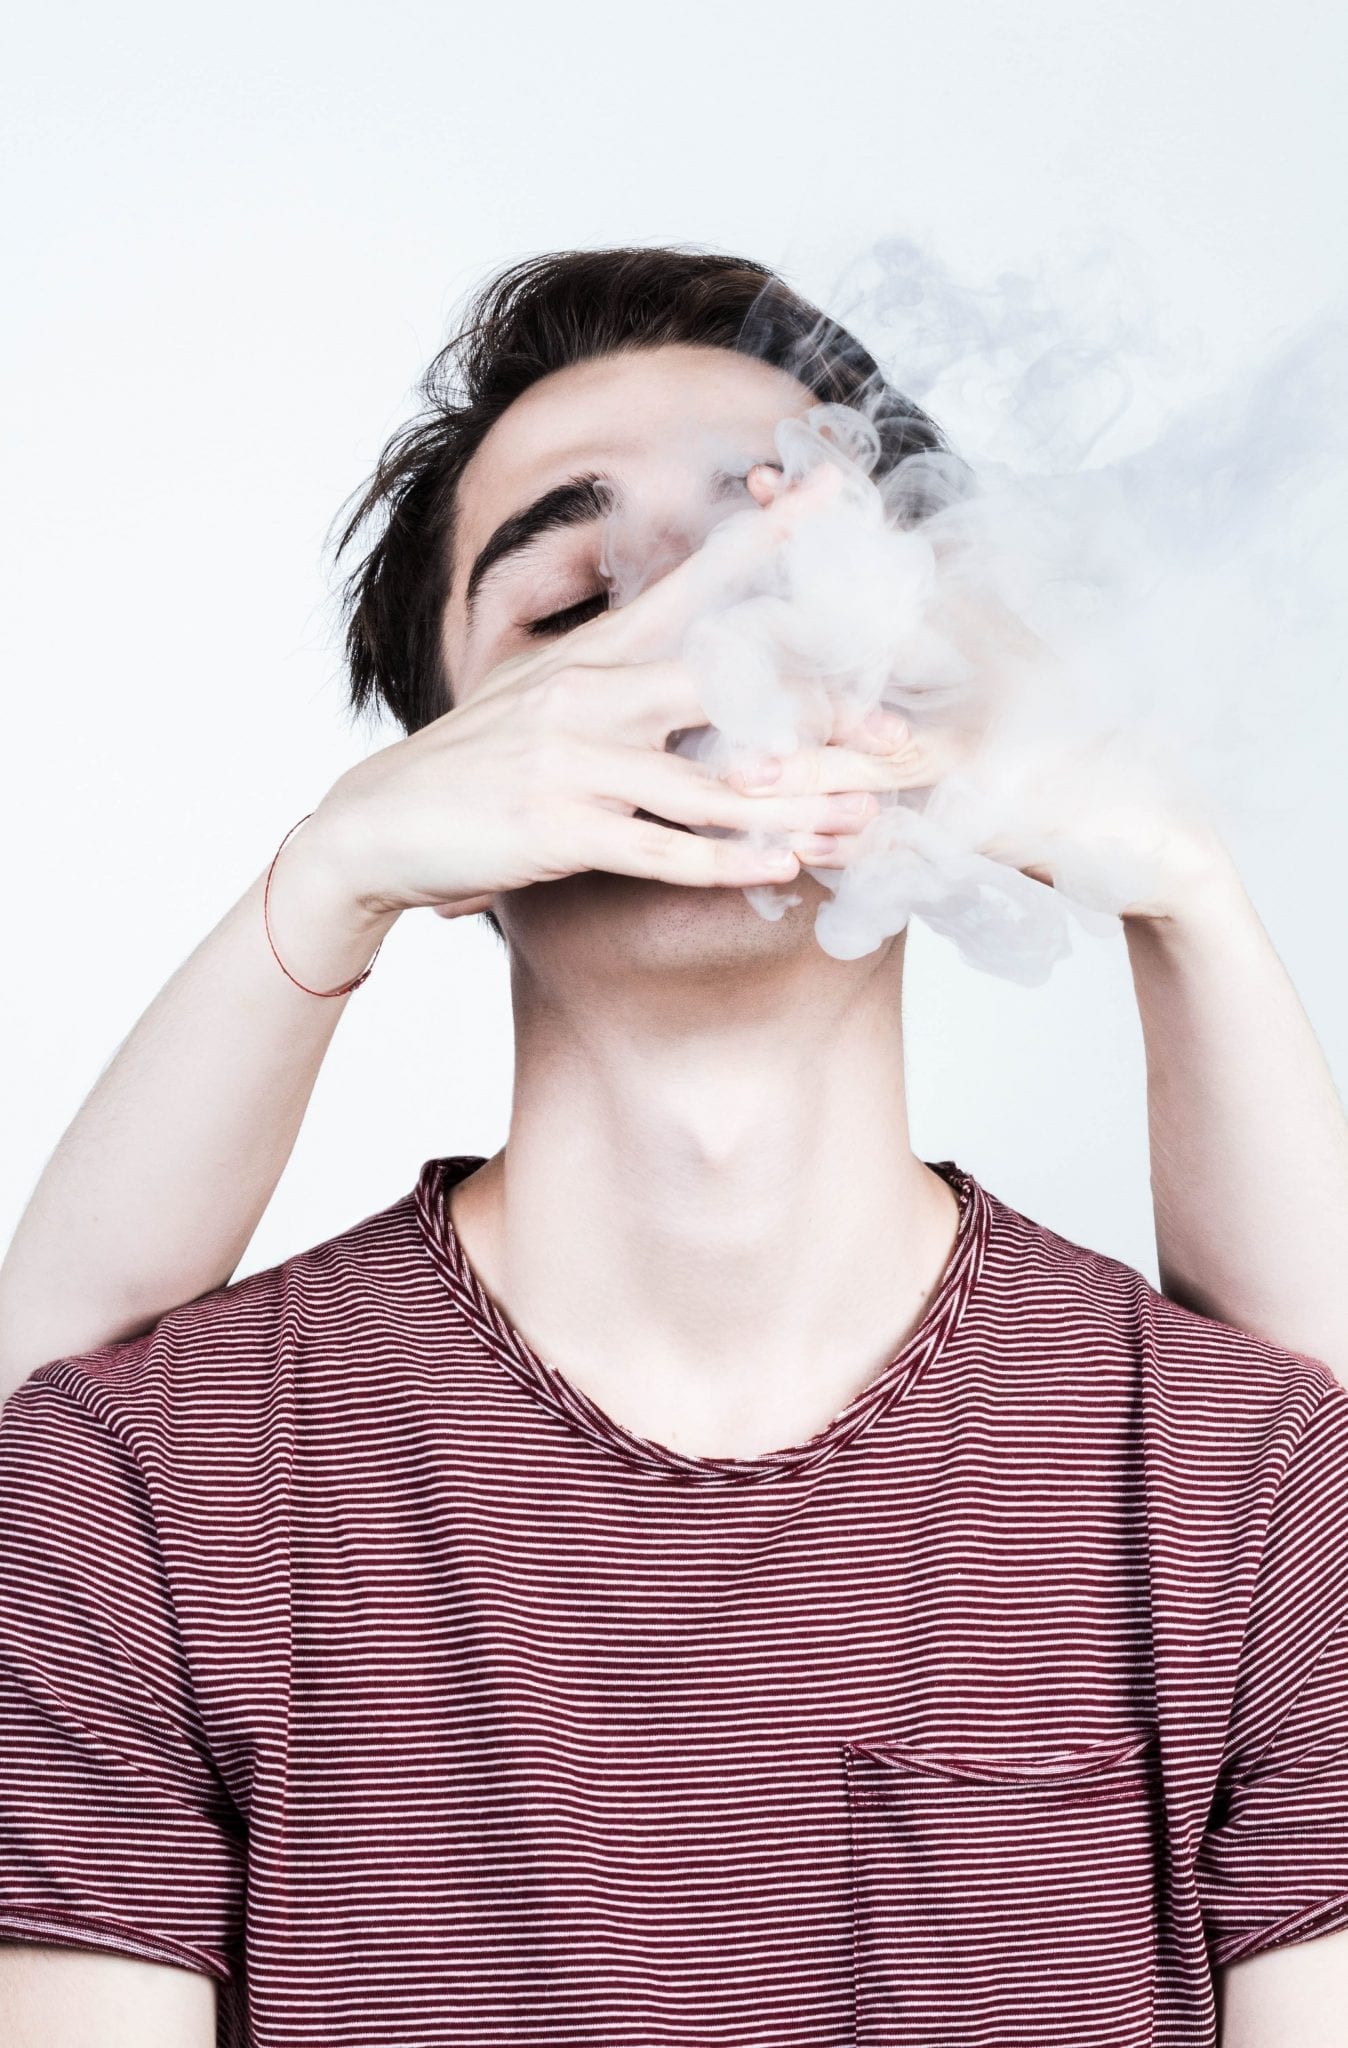 E-Cig Makers have Sixty Days to Keep Products from Teenagers